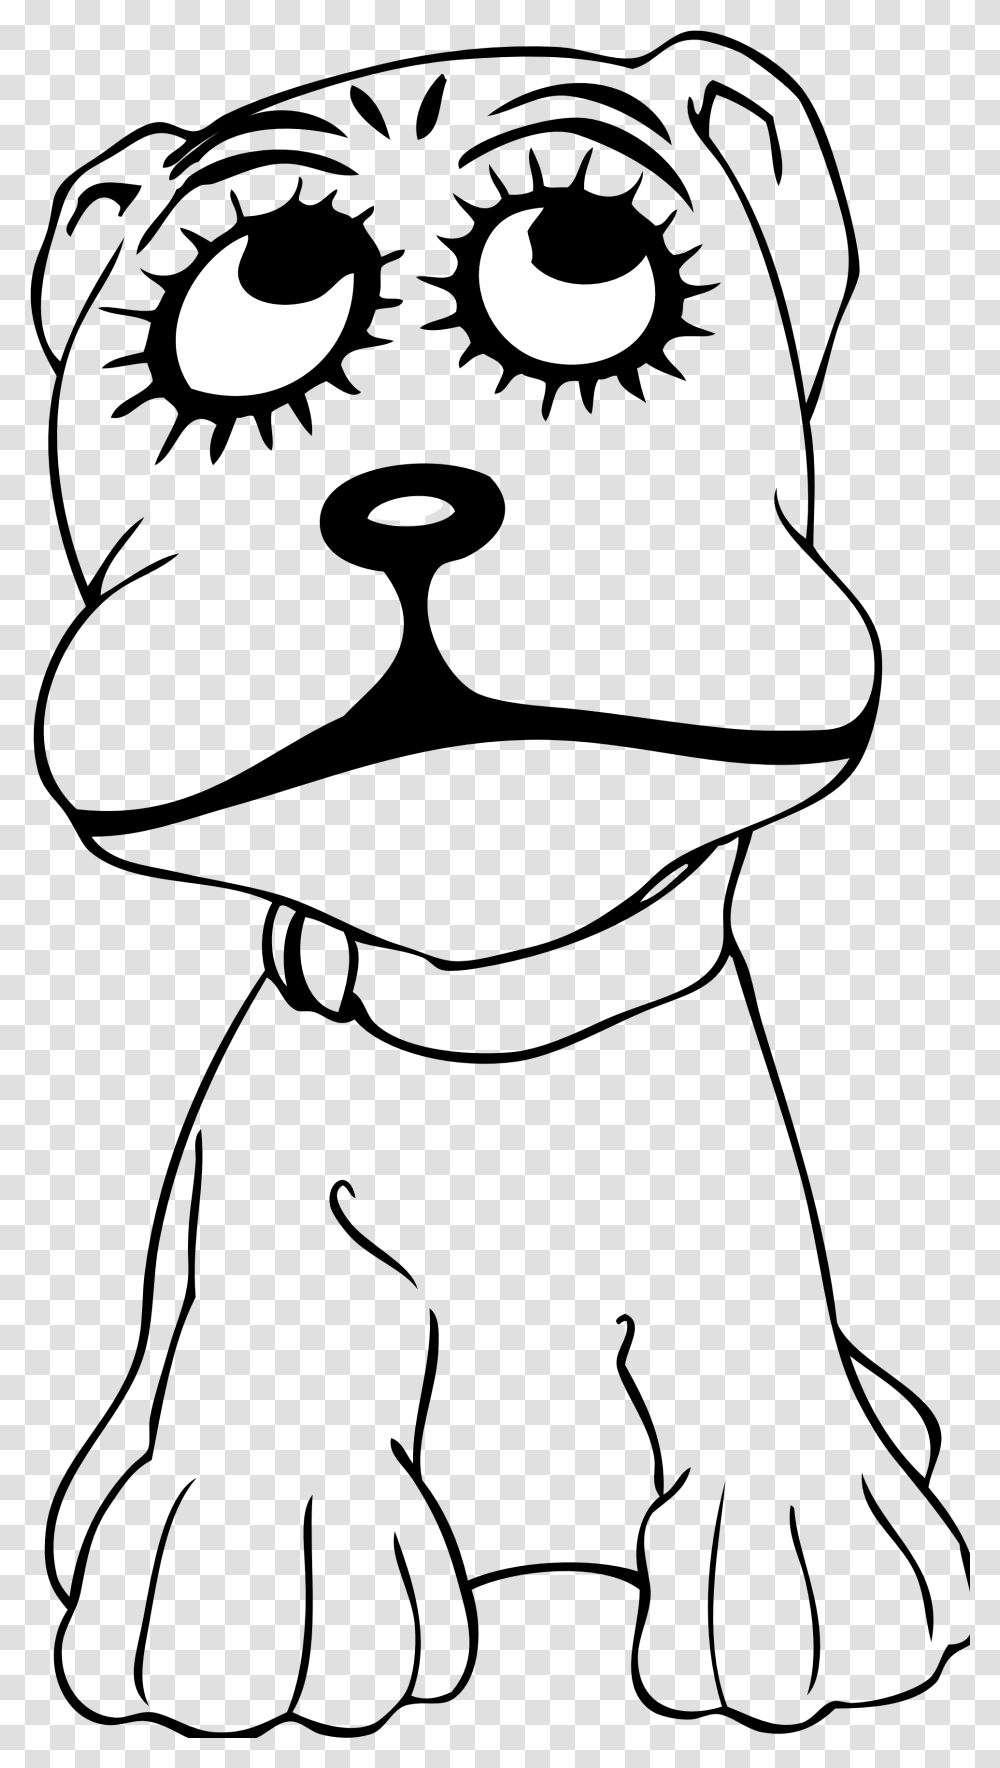 Black And White Cartoon Dog Cartoon Dog, Nature, Outdoors, Astronomy, Outer Space Transparent Png